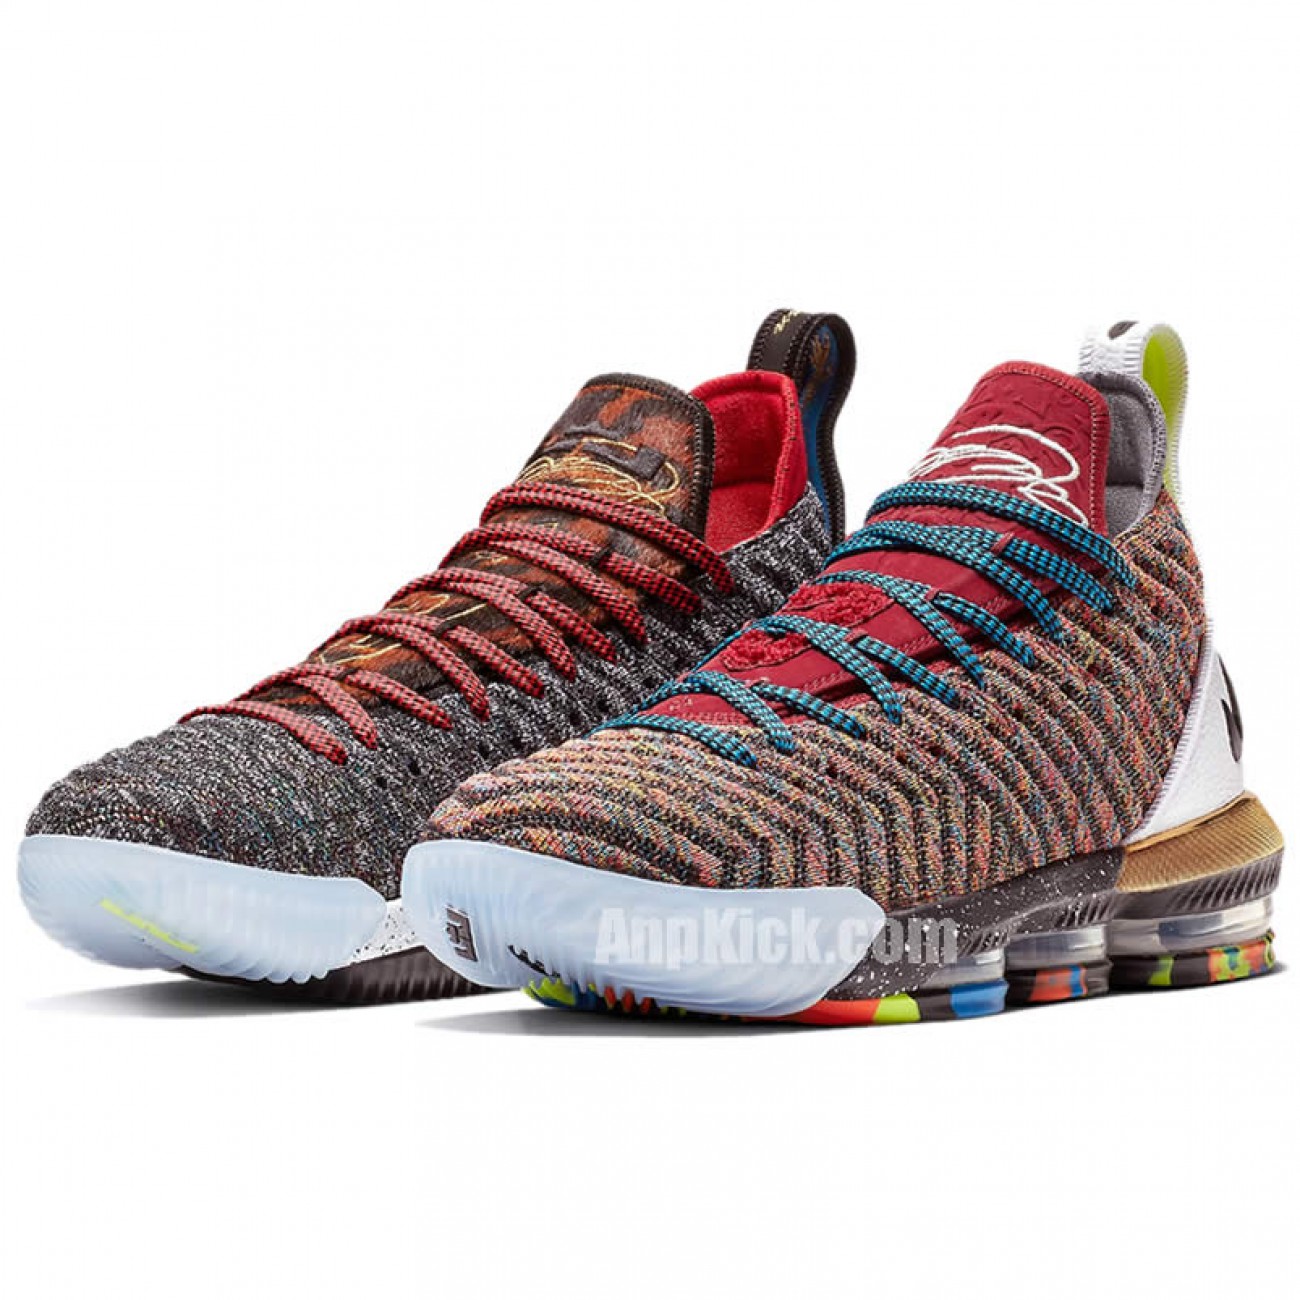 Nike Lebron 16 LMTD Multicolor "What The" 1 Thru 5 For Sale BQ6582-900